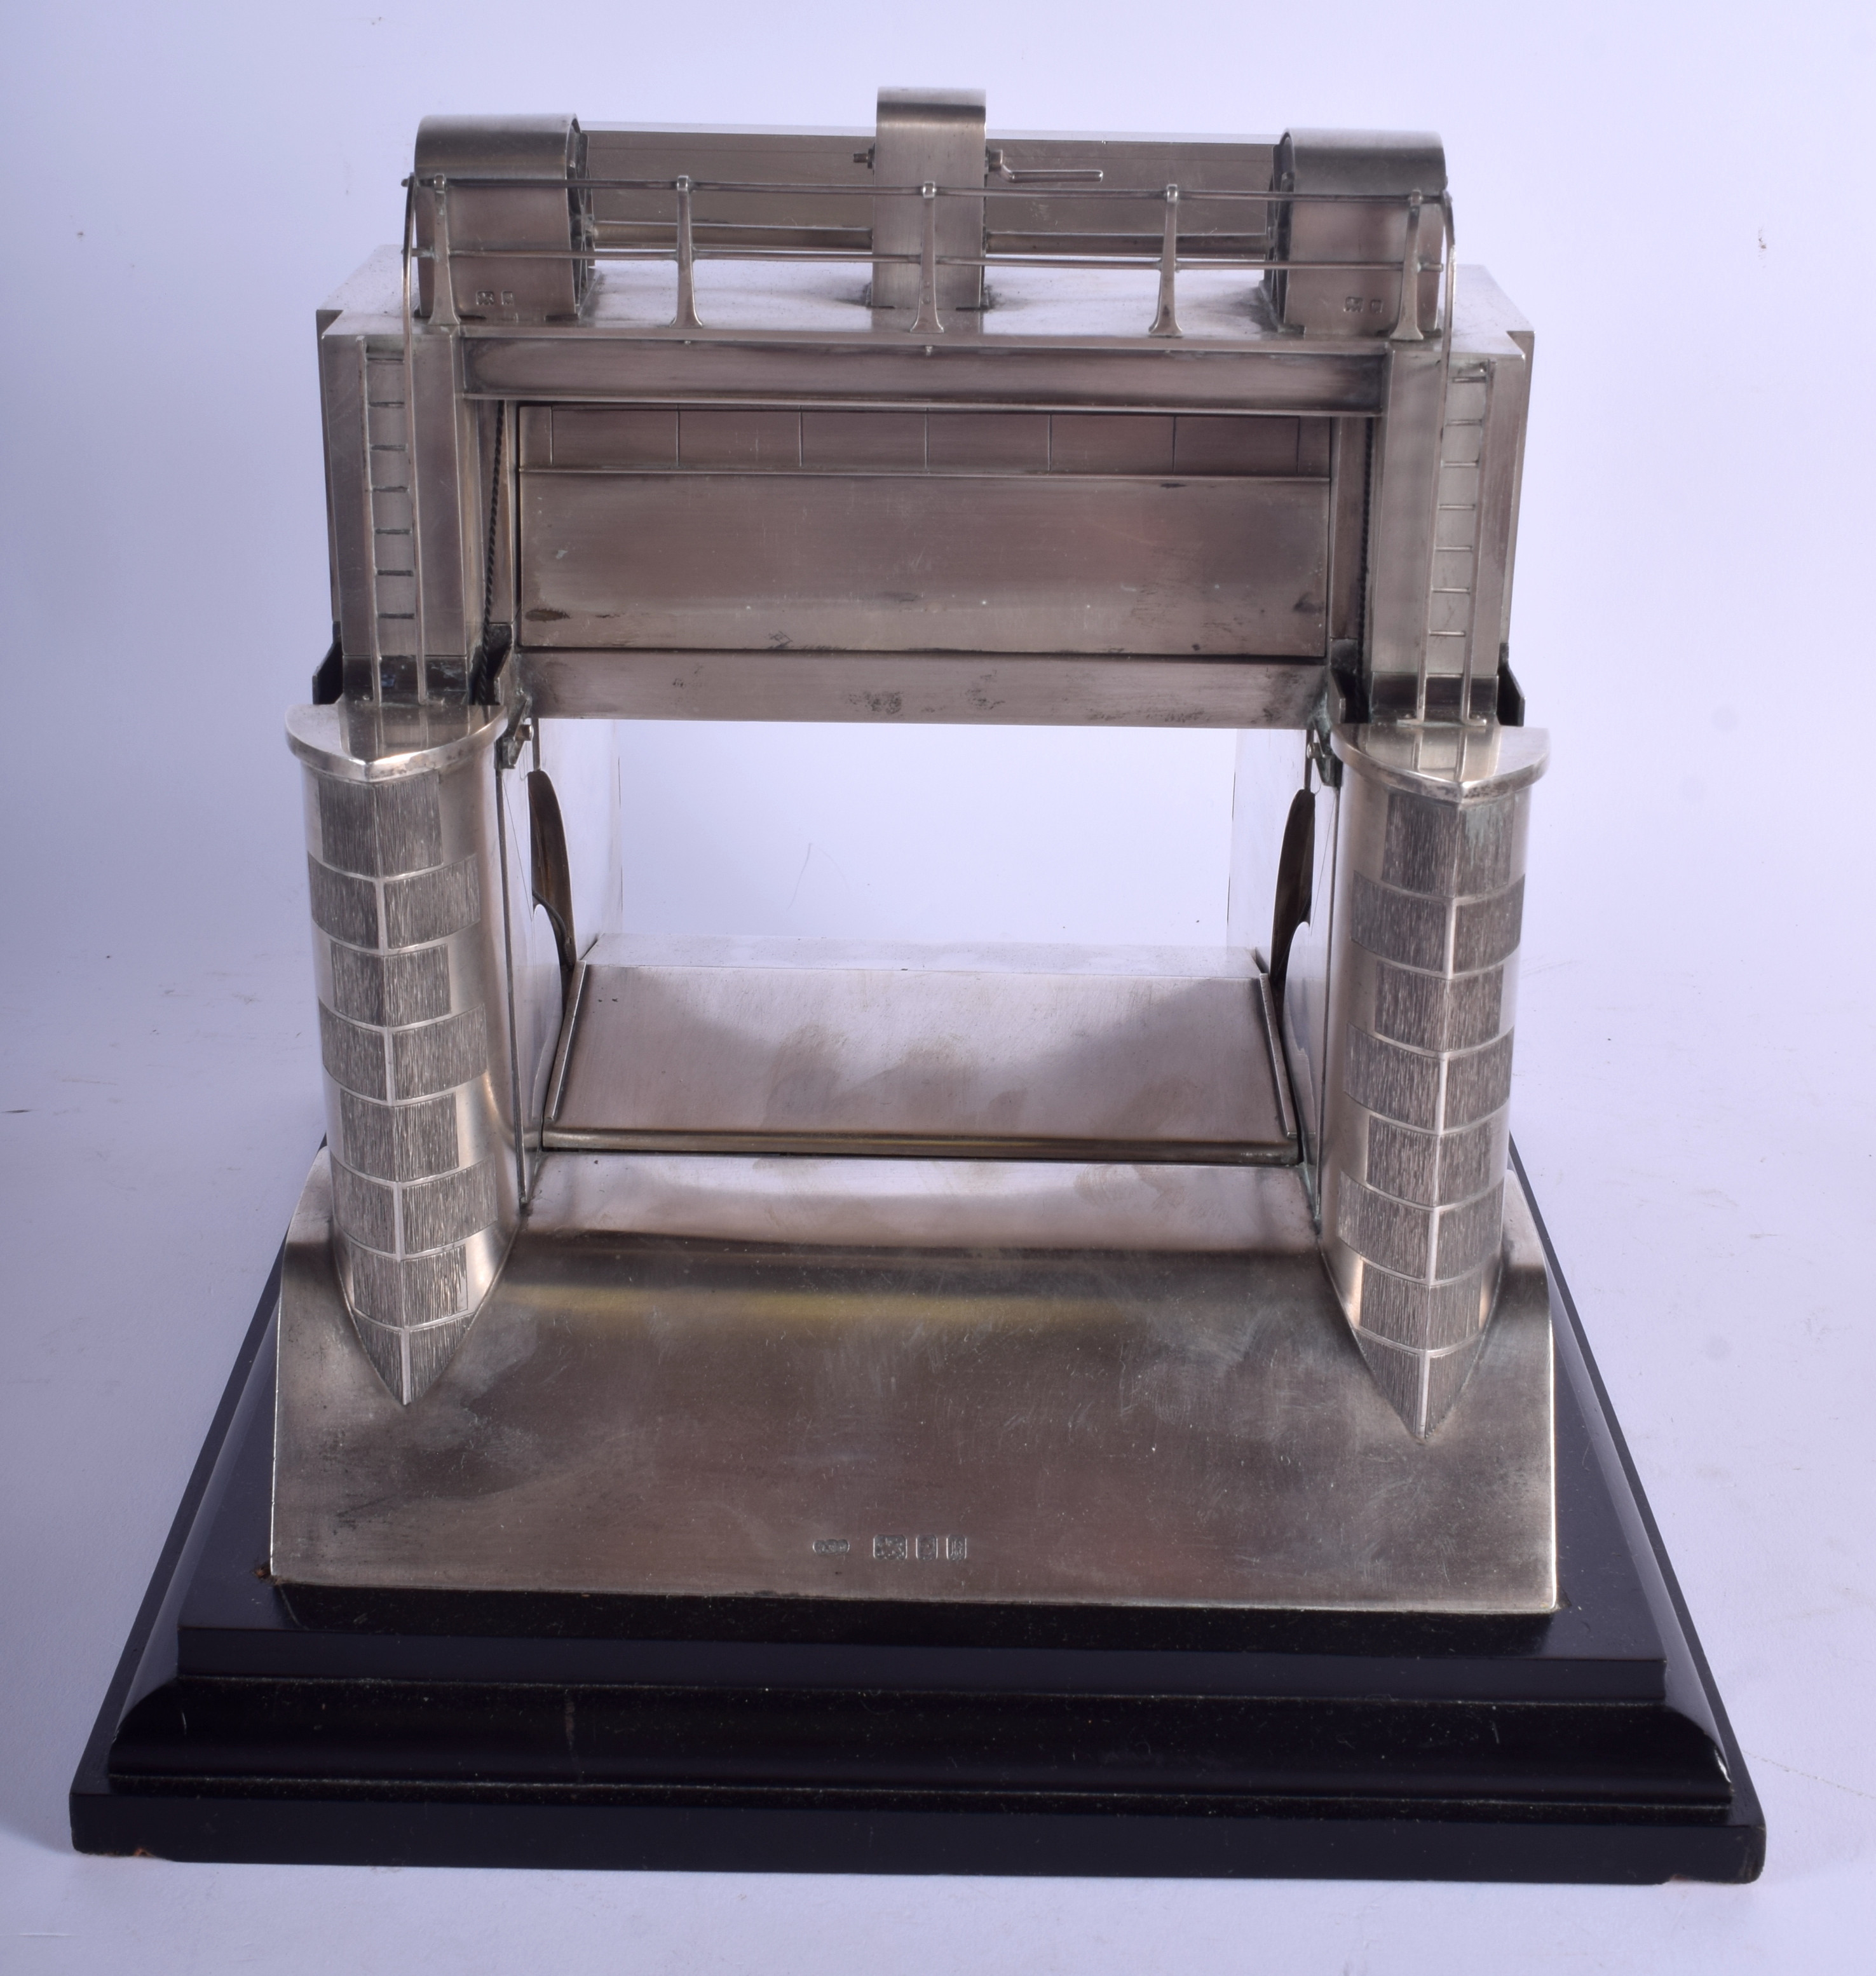 AN EXTREMELY RARE ENGLISH SILVER ART DECO MODEL OF THE SULEMANKI HEADWORKS by Wright & Davies (Willi - Image 4 of 7